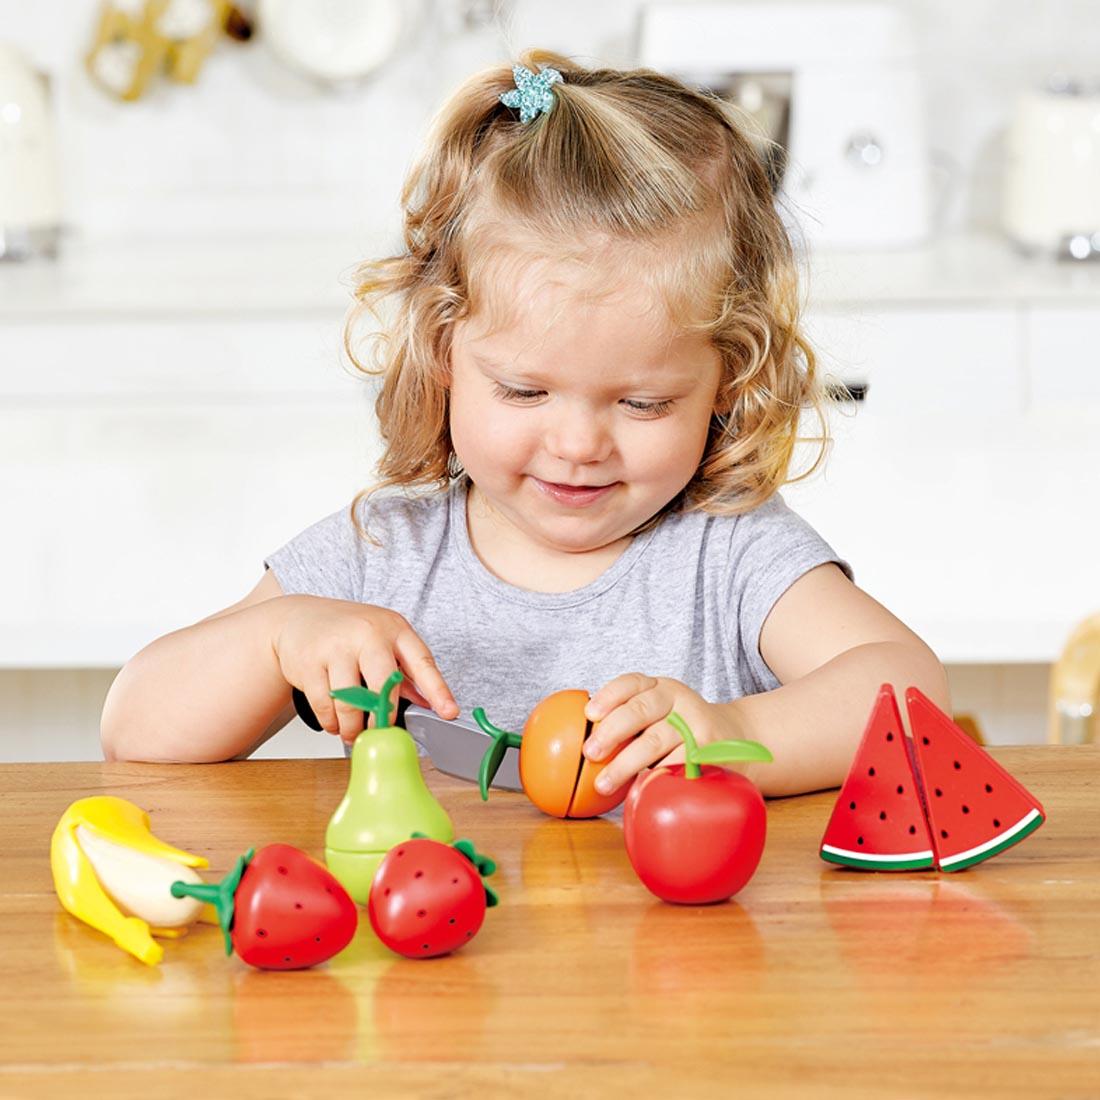 Child playing with the Healthy Fruit Play Set By Hape